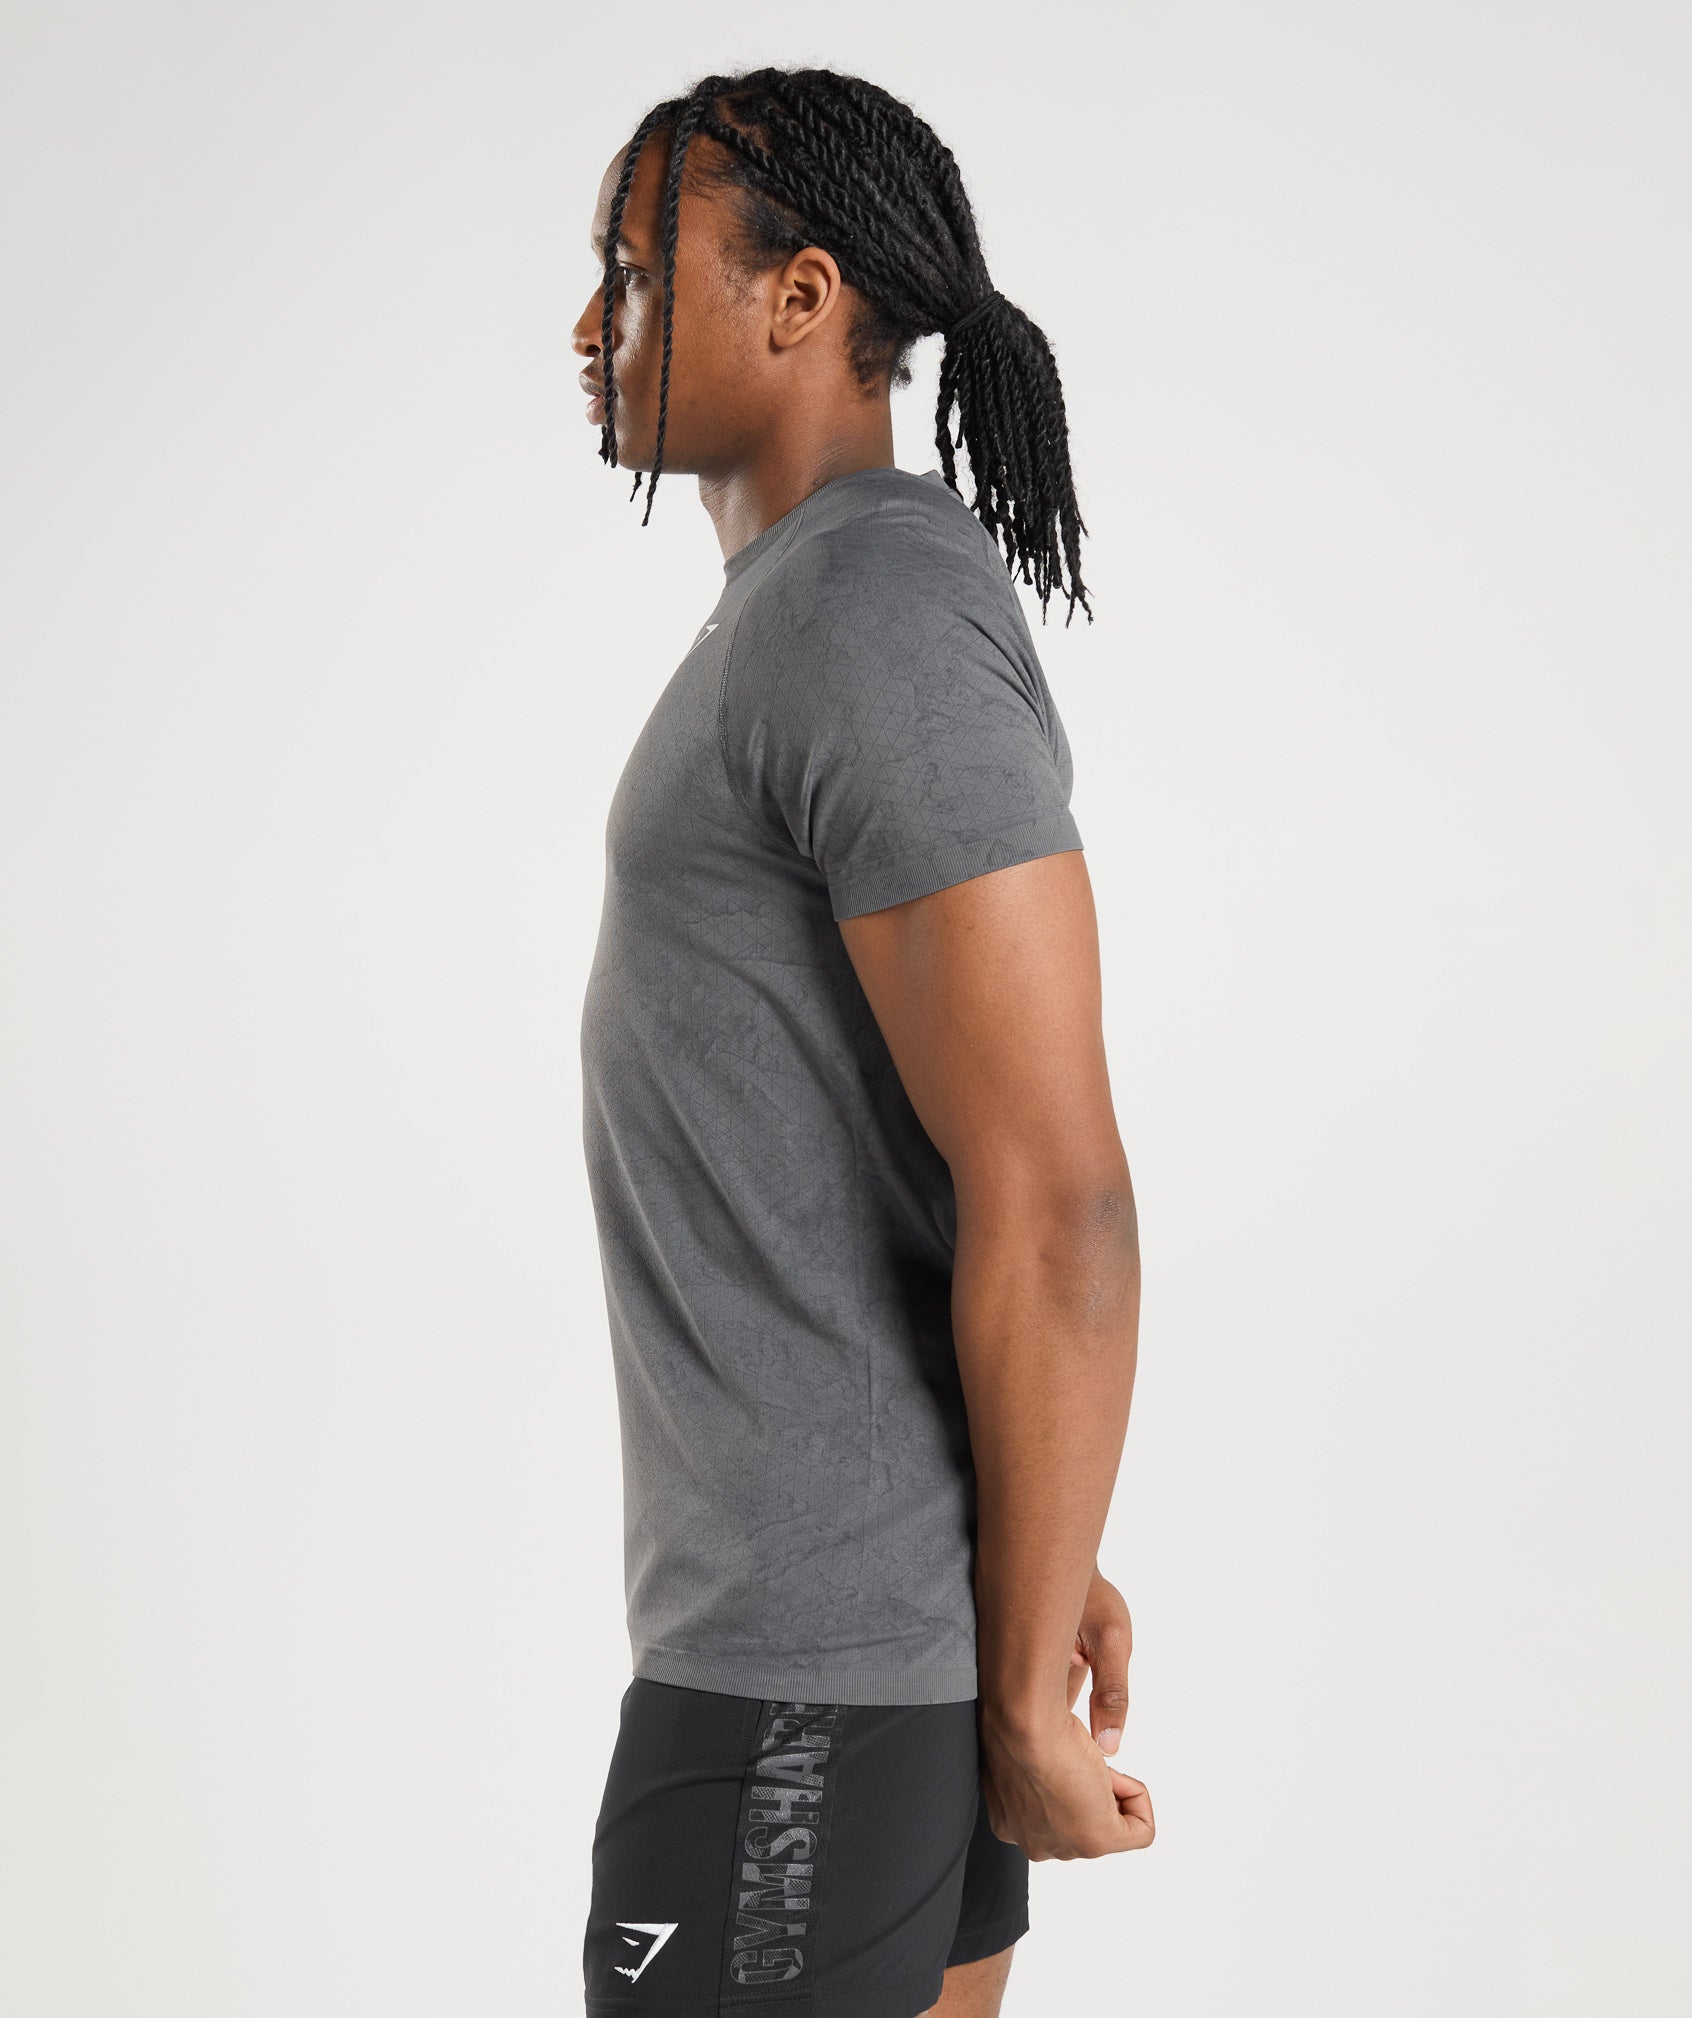 Geo Seamless T-Shirt in Charcoal Grey/Black - view 3